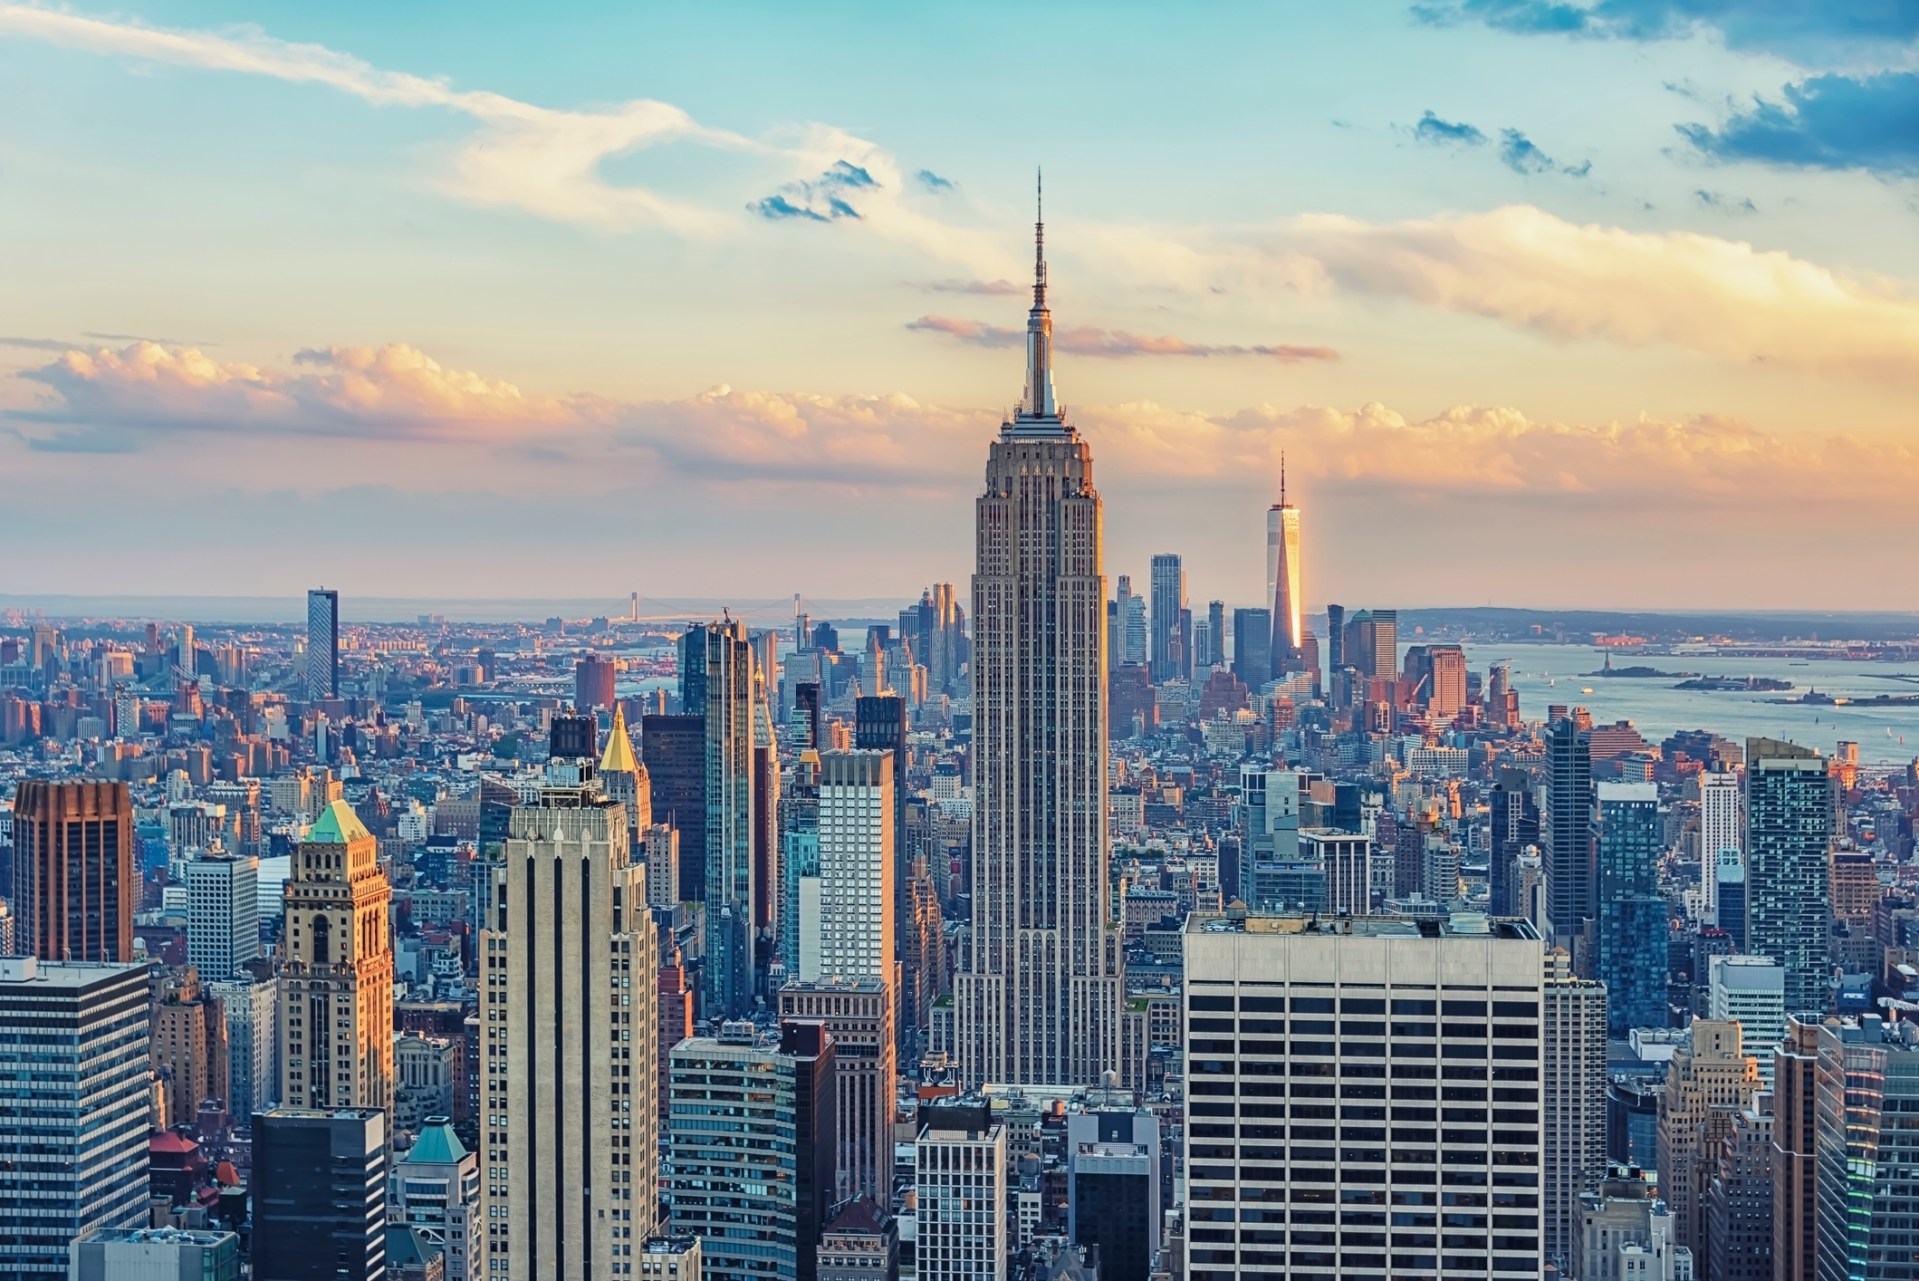 How To Find The Right New York City Data Center For You